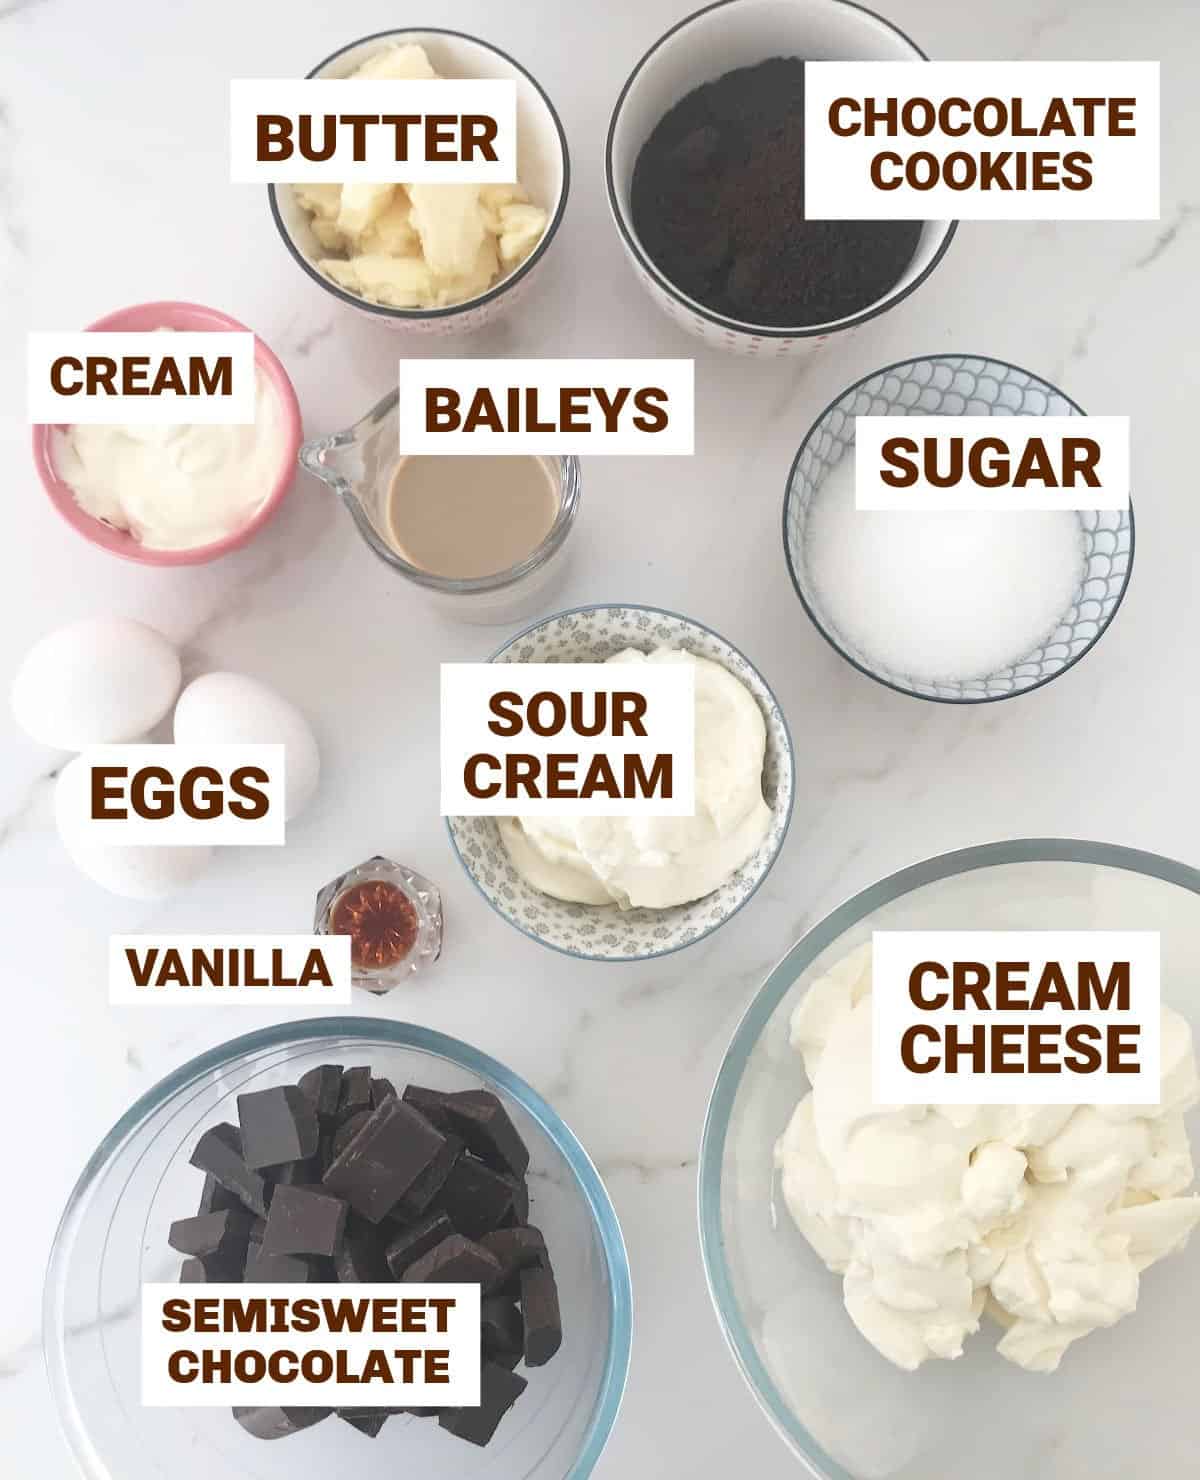 Ingredients for baileys chocolate cheesecake in bowls on white surface, including eggs, cookies, butter, sugar, vanilla, sour cream, sugar, cream.